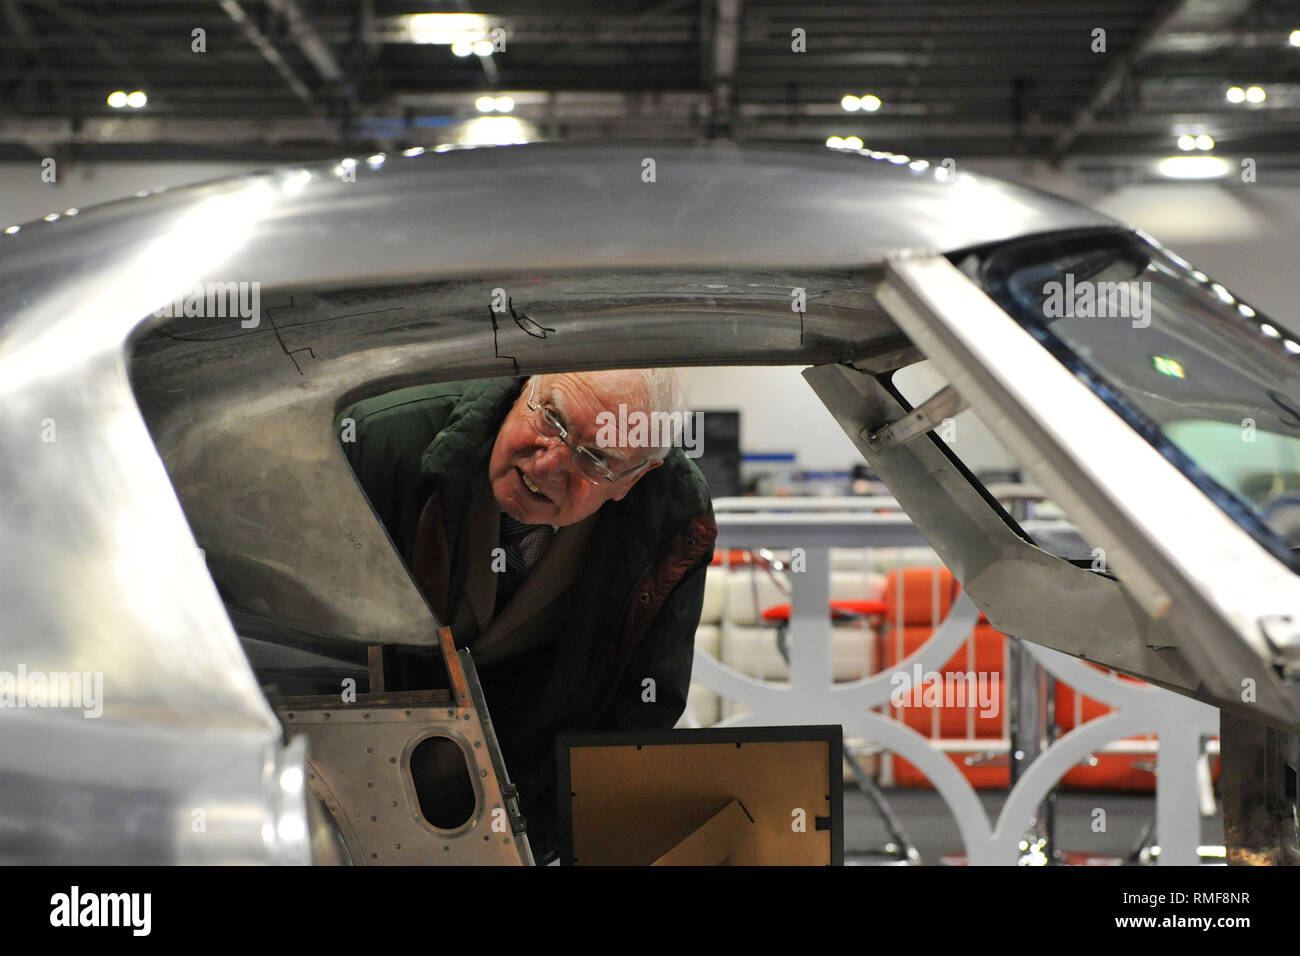 ExCel London, UK. 14th Feb 2019. A man looking at the stripped down shell of a Jaguar E-Type in the process of being restored, on display at the London Classic Car Show which is taking place at ExCel London, United Kingdom. Around 700 of the world's finest classic cars are on display at the show ranging from vintage pre-war tourers to a modern concept cars. The show brings in around 37,000 visitors, ranging from serious petrol heads to people who just love beautiful and classic vehicles. Credit: Michael Preston/Alamy Live News Stock Photo